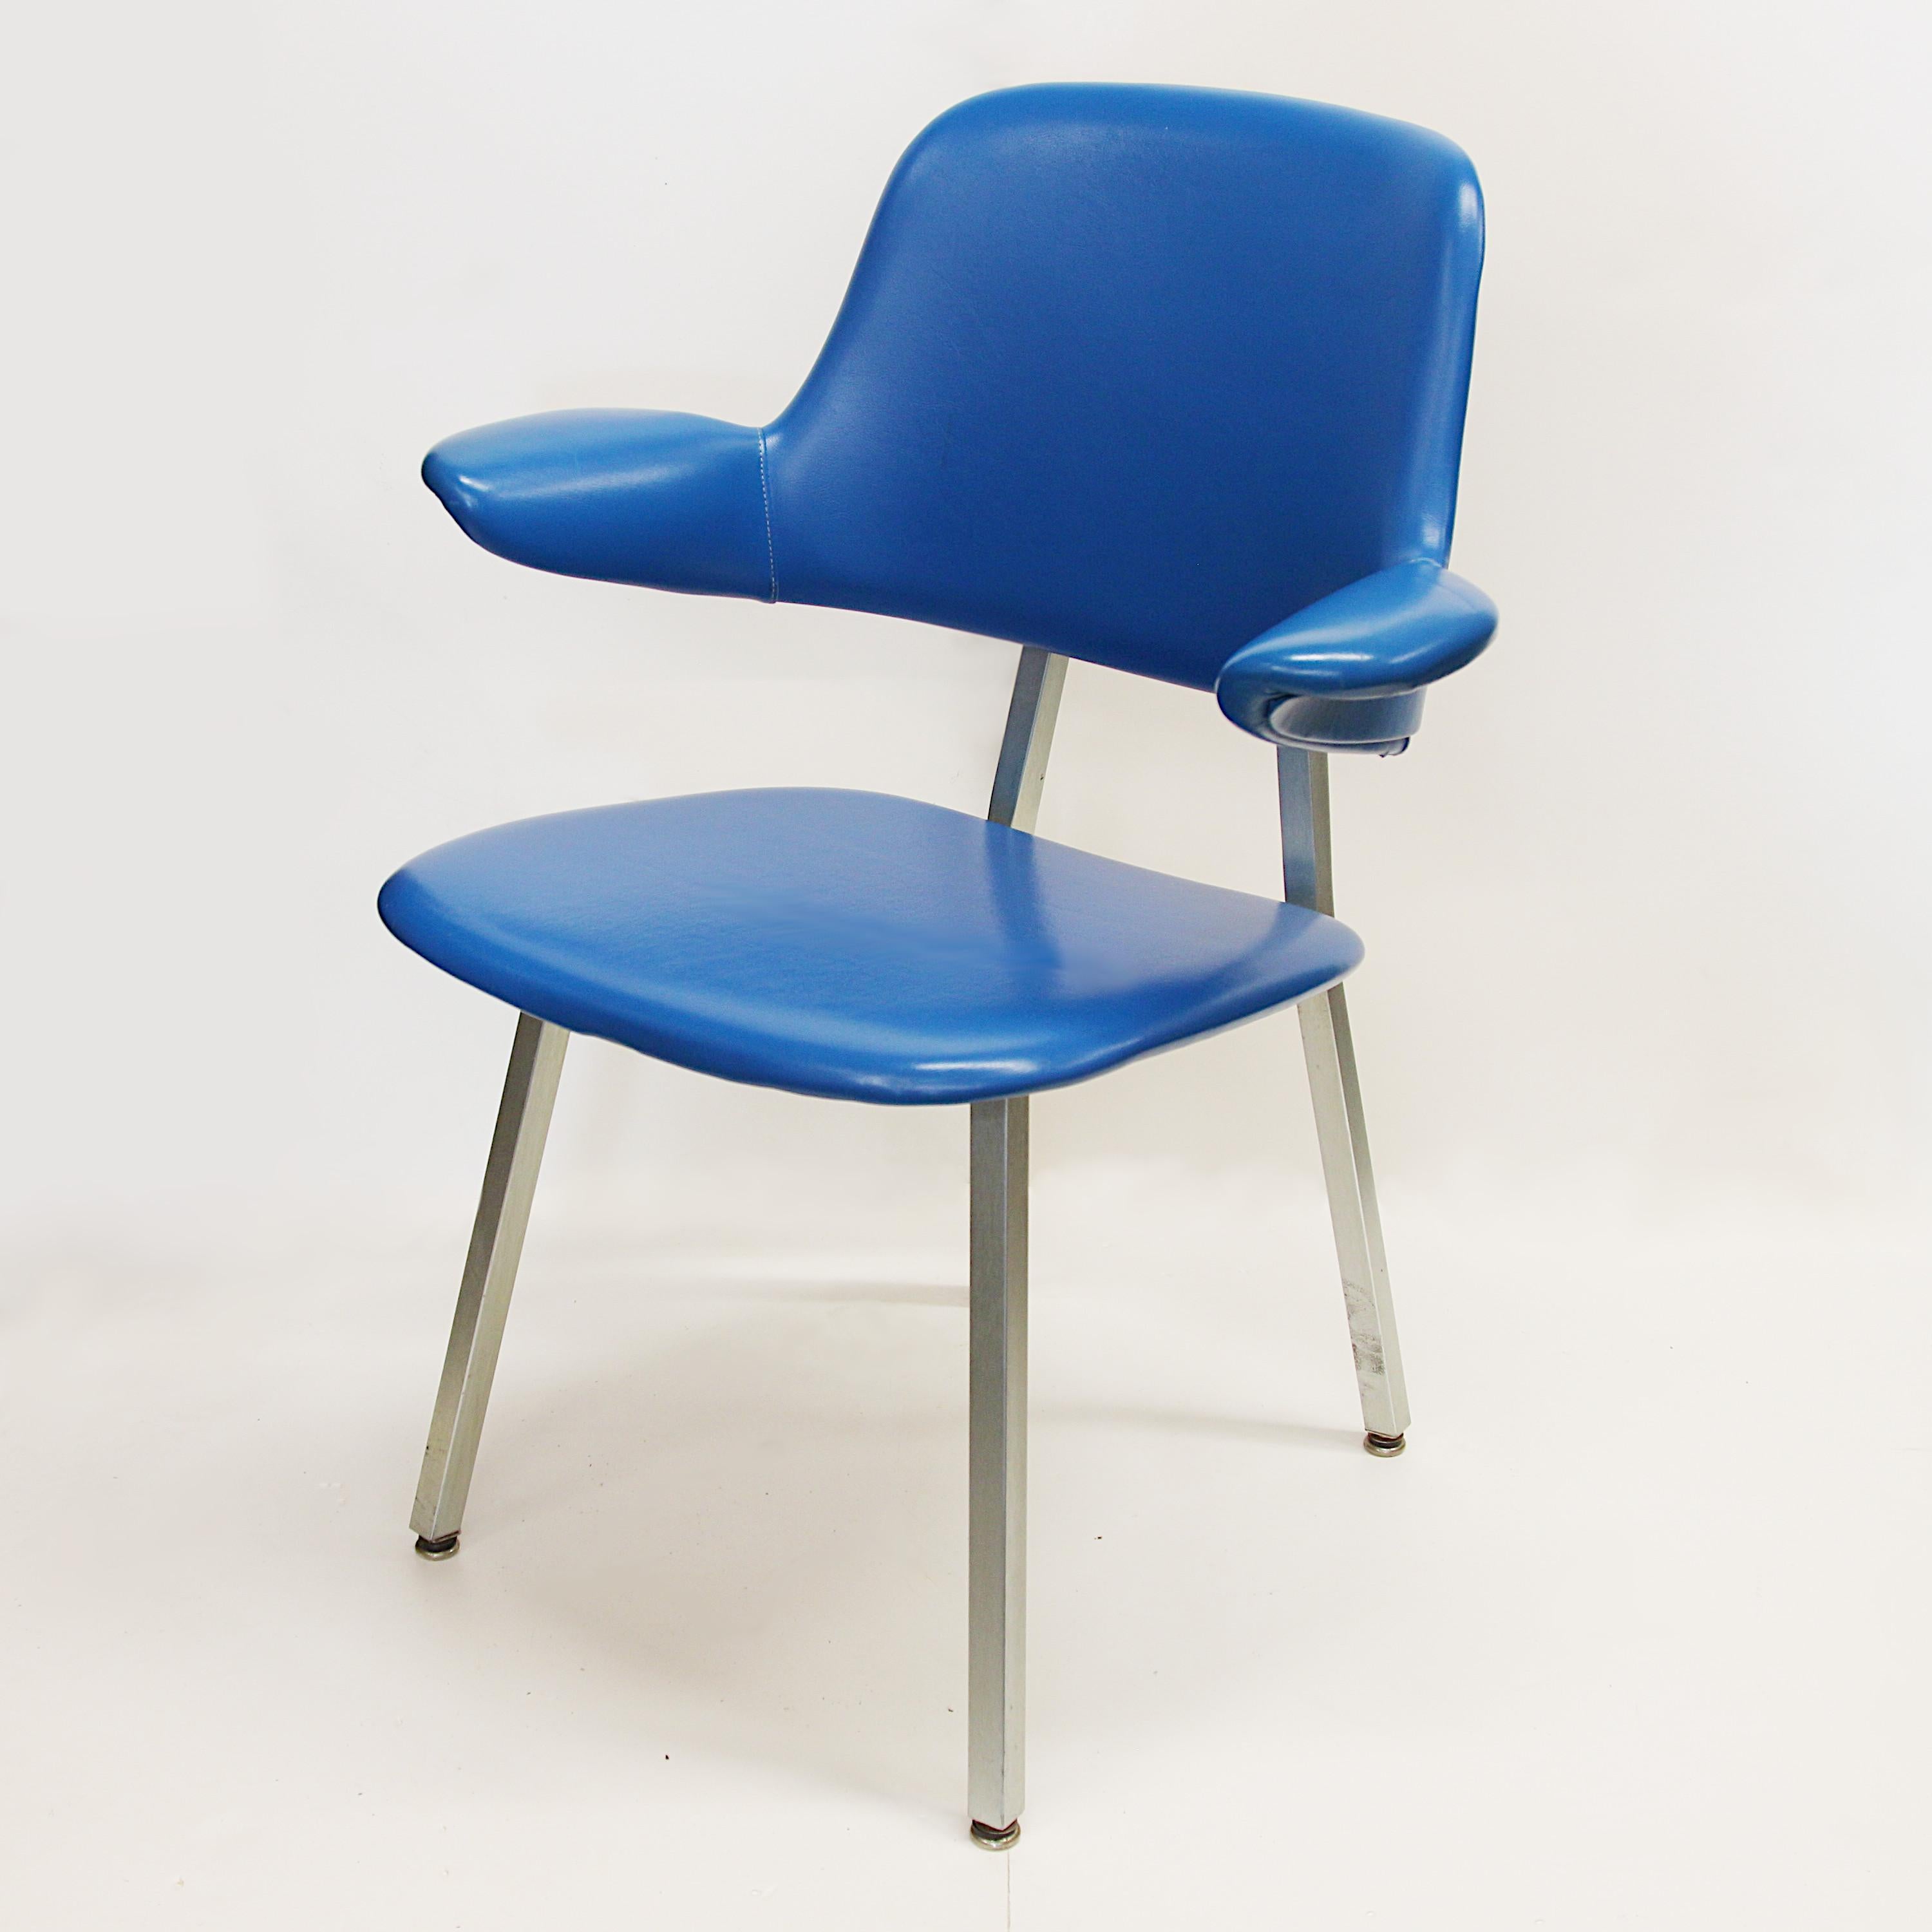 Wonderful set of 8 Model 420 armchairs by Shaw Walker. Chairs feature blue vinyl upholstery aluminum bases and unique floating-arm design.